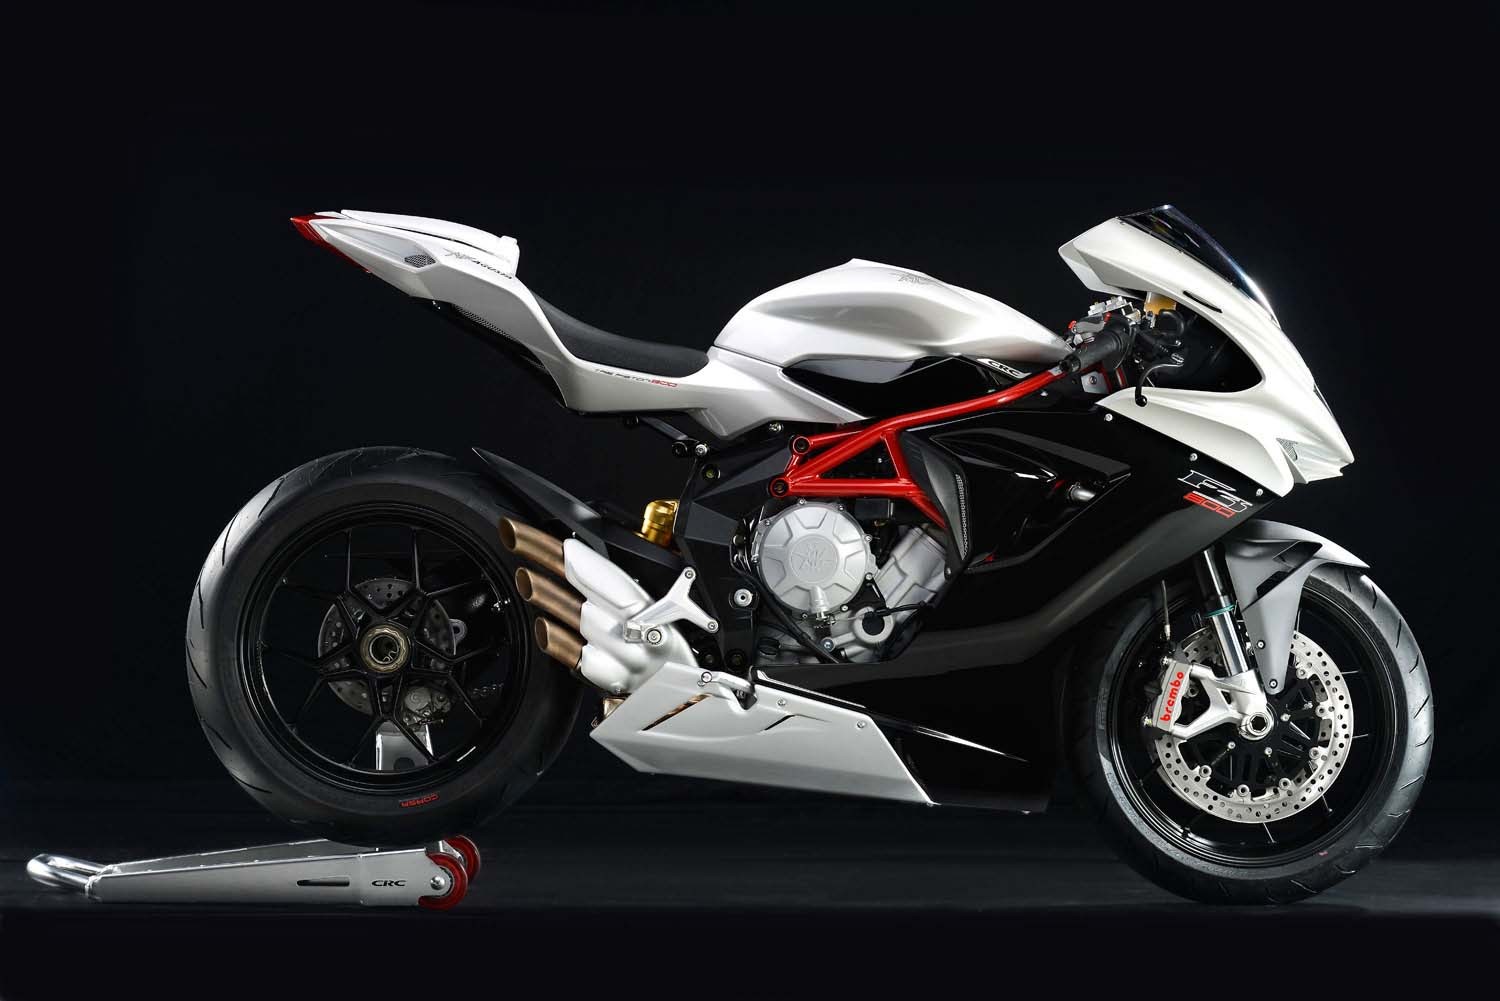 General 1500x1001 motorcycle MV agusta MV Agusta f3 800 studio Silver Motorcycles black background simple background vehicle